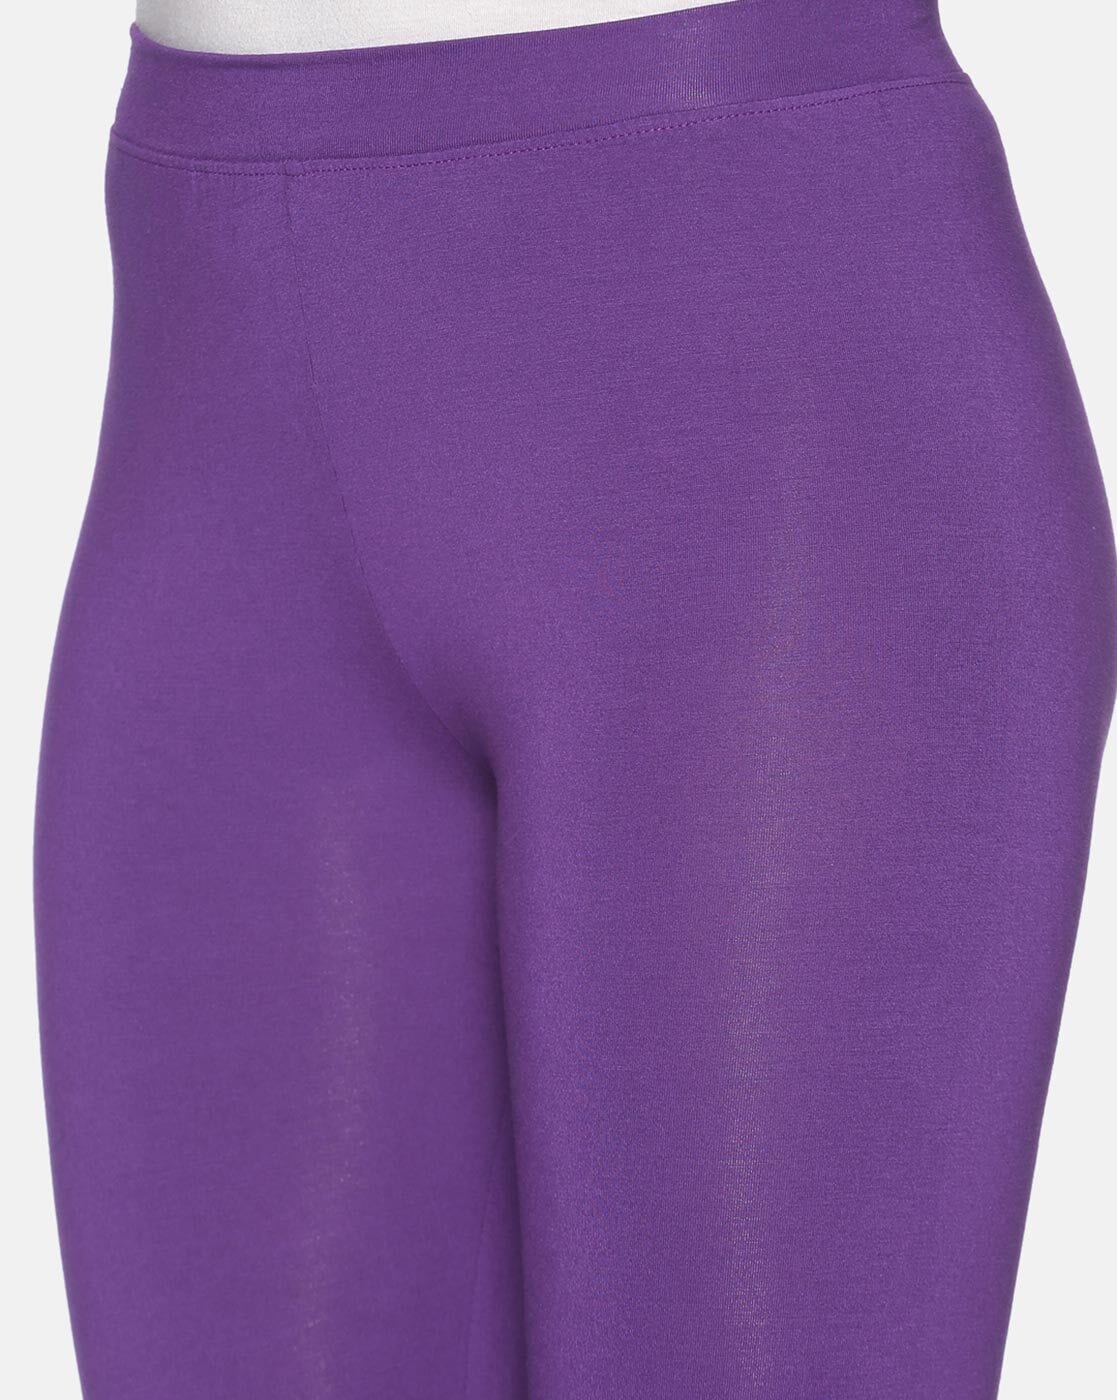 Zivame Shimmer Stretch Ankle Length Leggings - Mulberry Purple